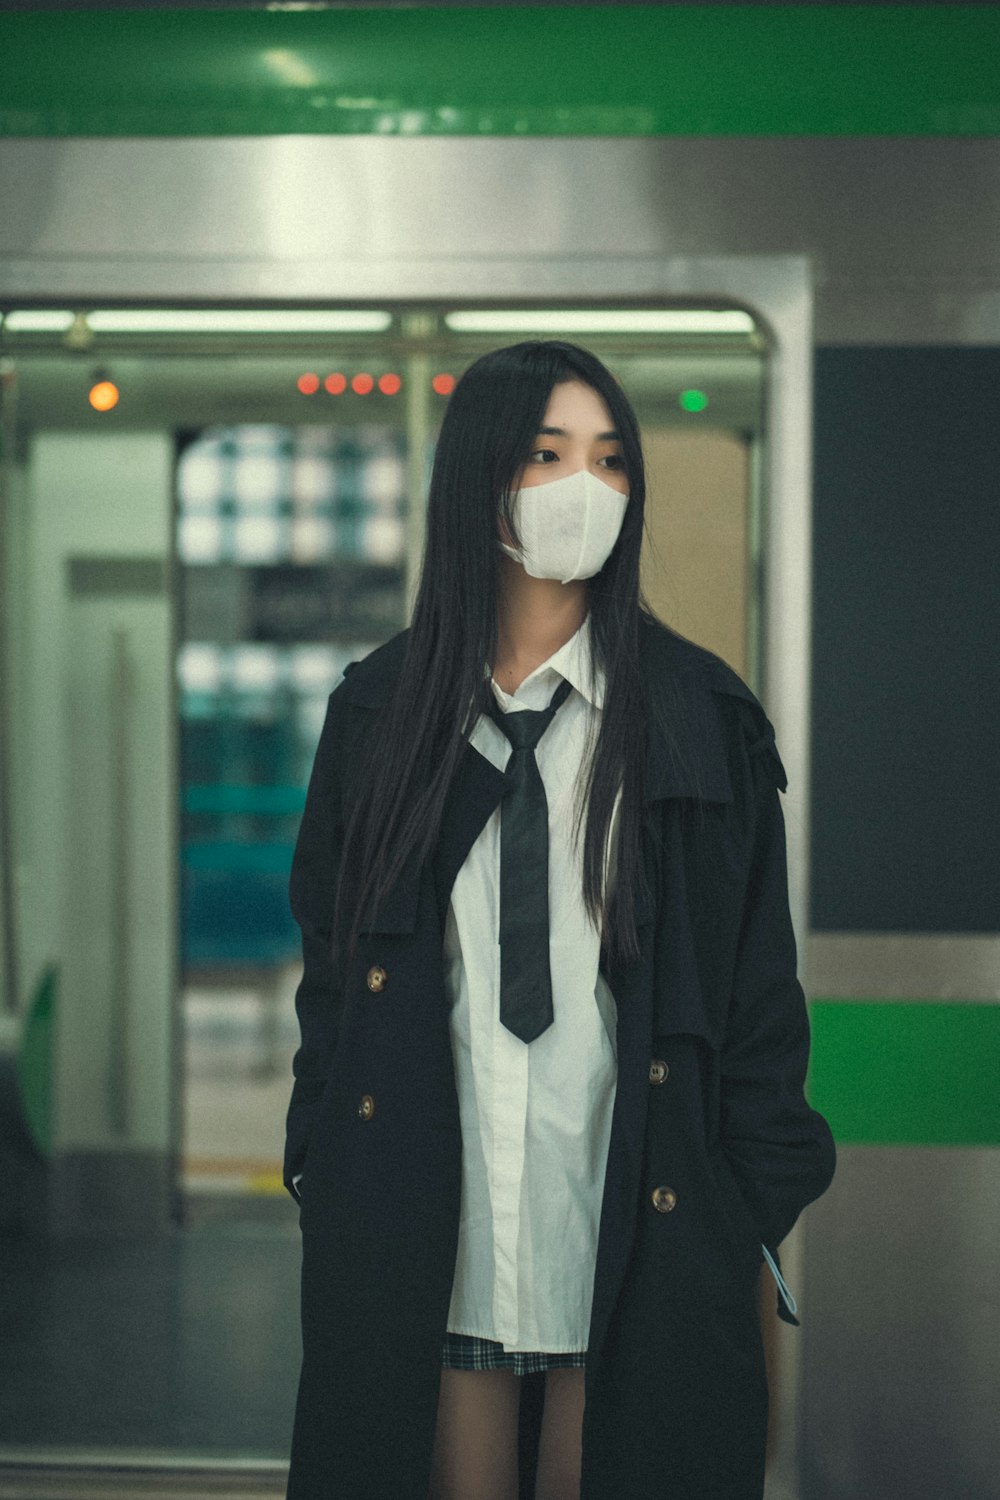 a woman wearing a face mask standing in a subway station